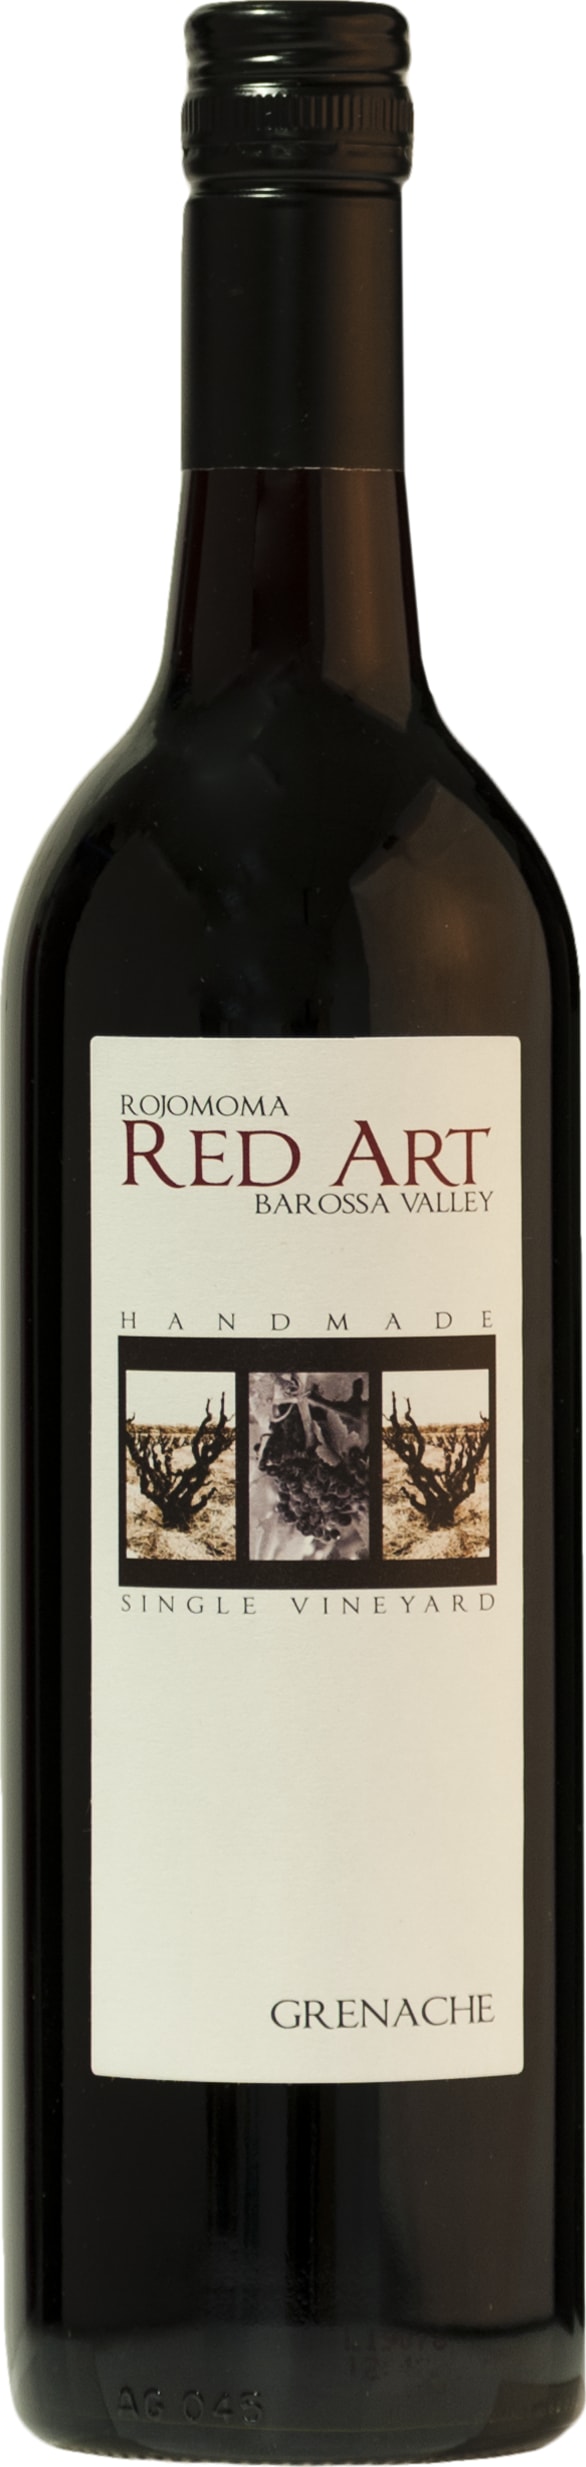 Rojomoma Red Art Grenache 2020 75cl - Buy Rojomoma Wines from GREAT WINES DIRECT wine shop